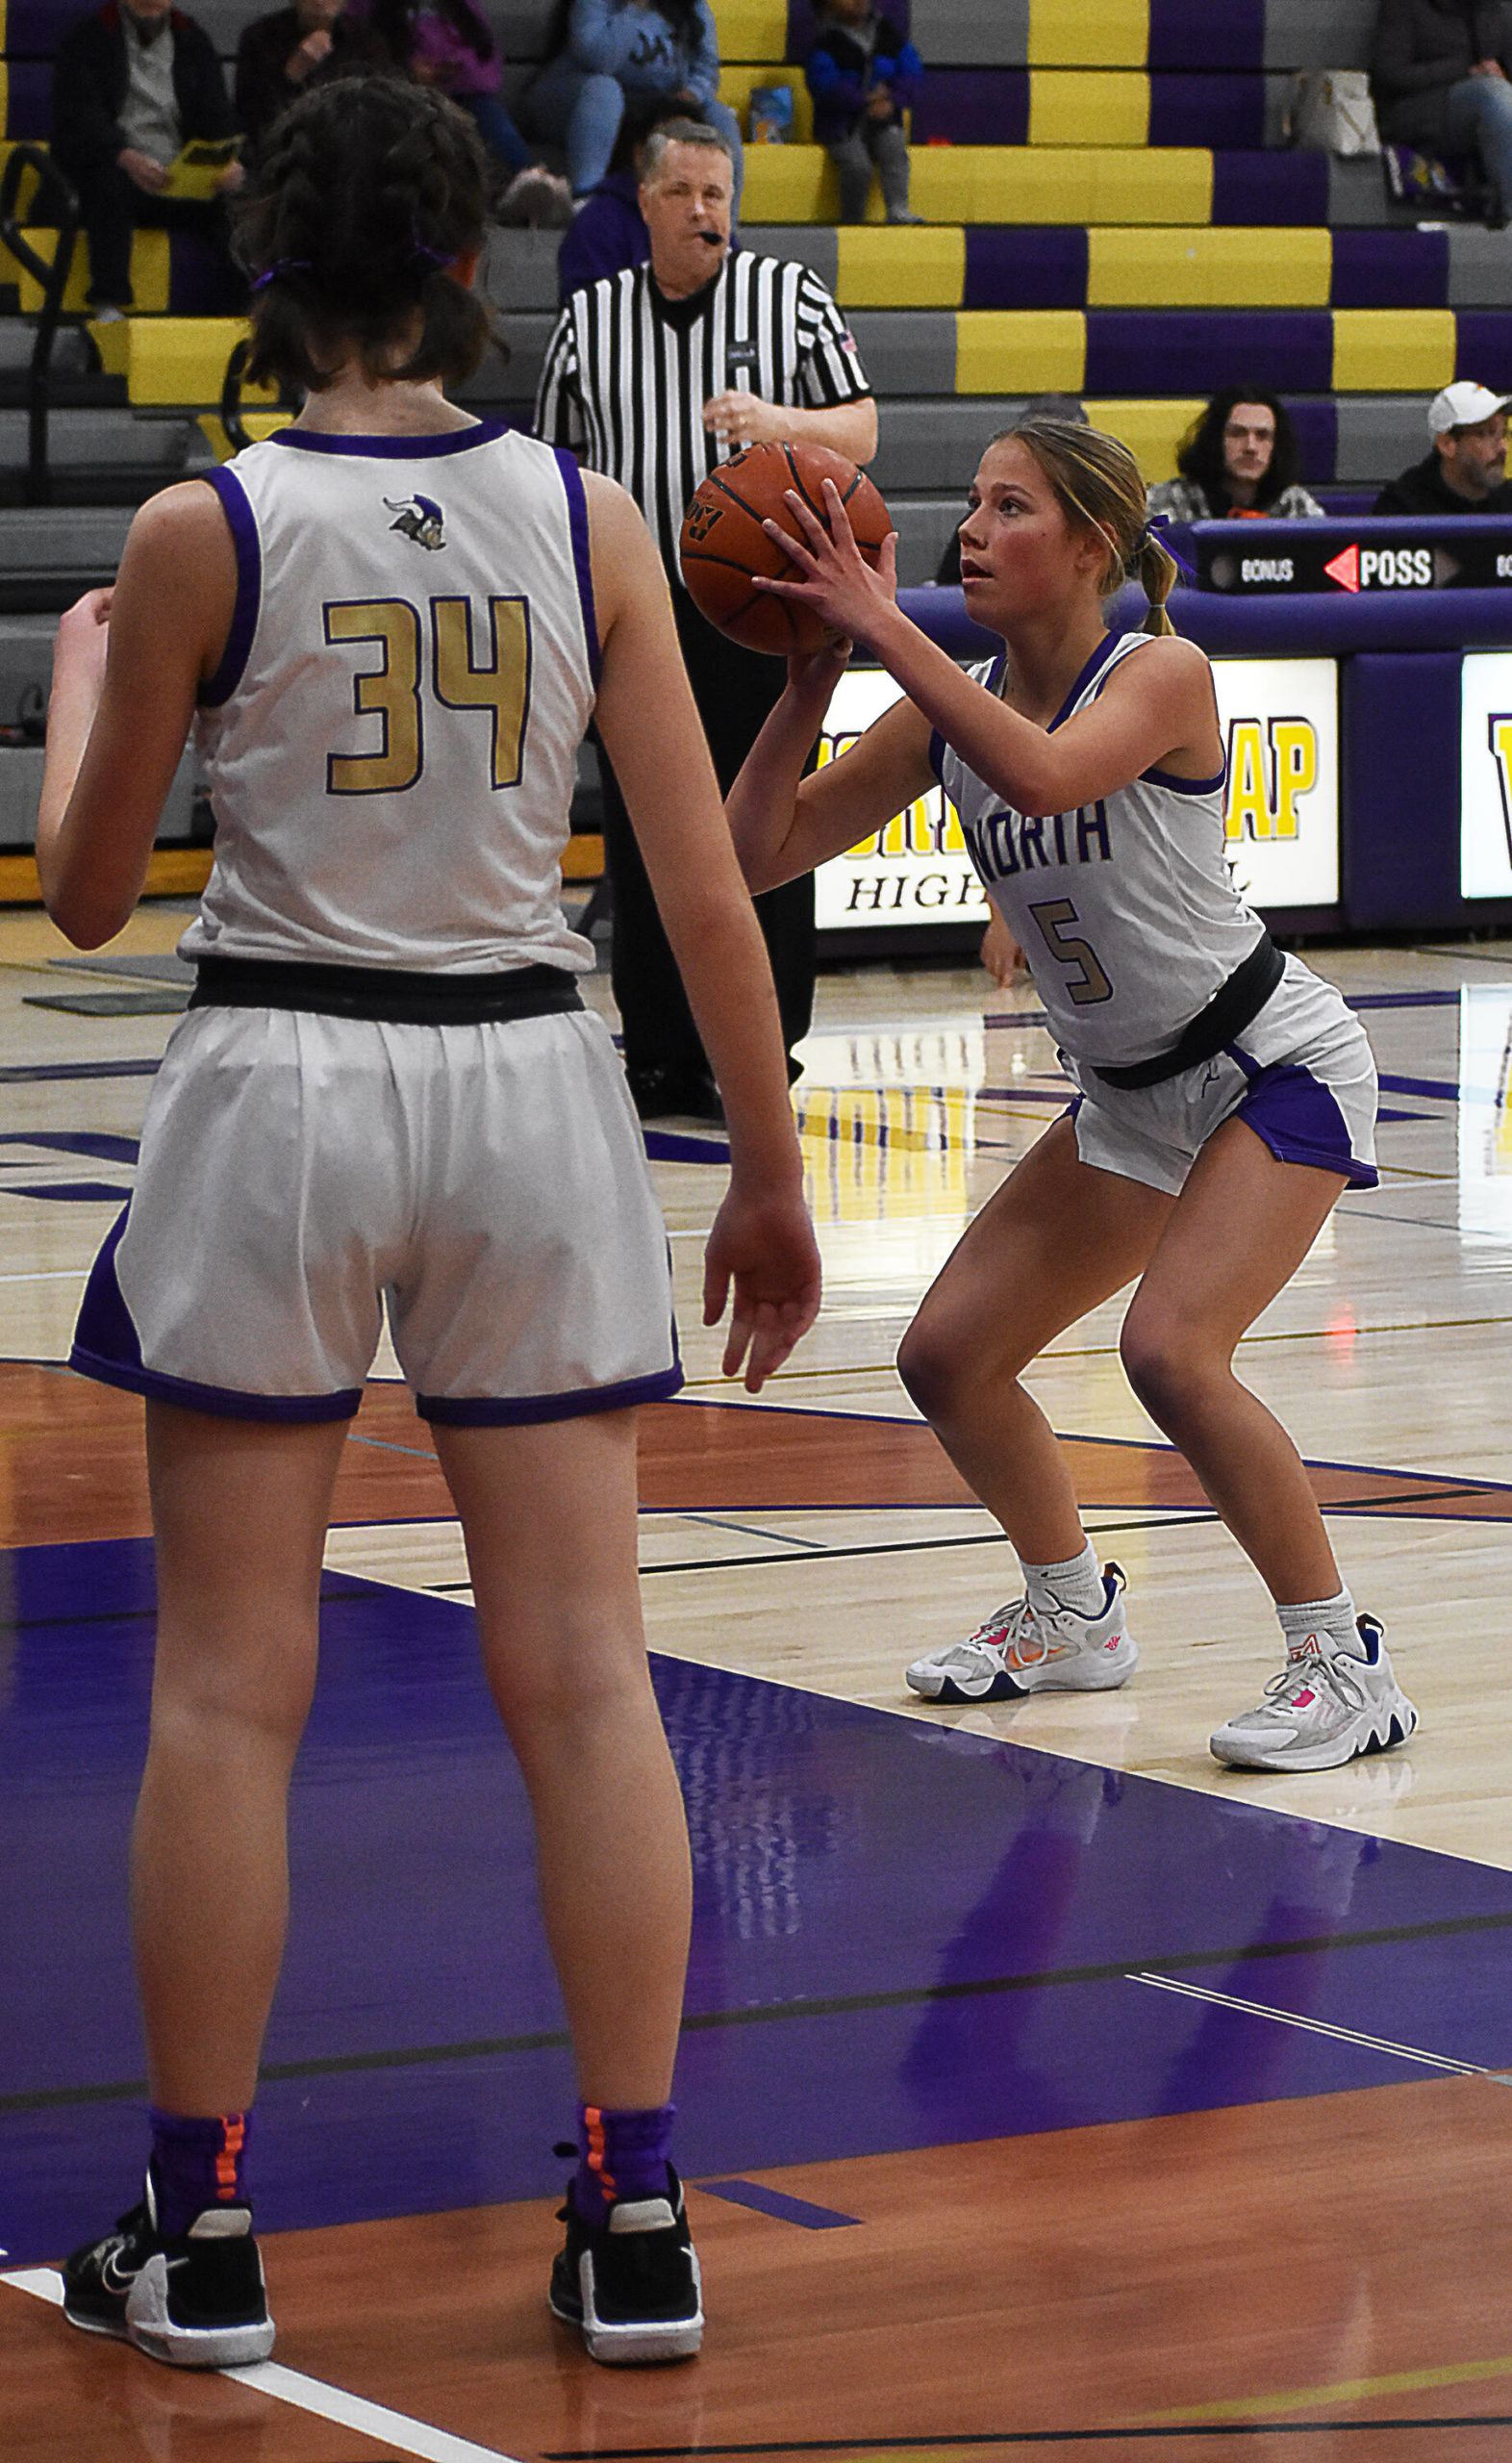 Evelyn Beers shoots a free throw while Avery Kline prepares to grab the rebound. Nicholas Zeller-Singh/Kitsap News Group Photos